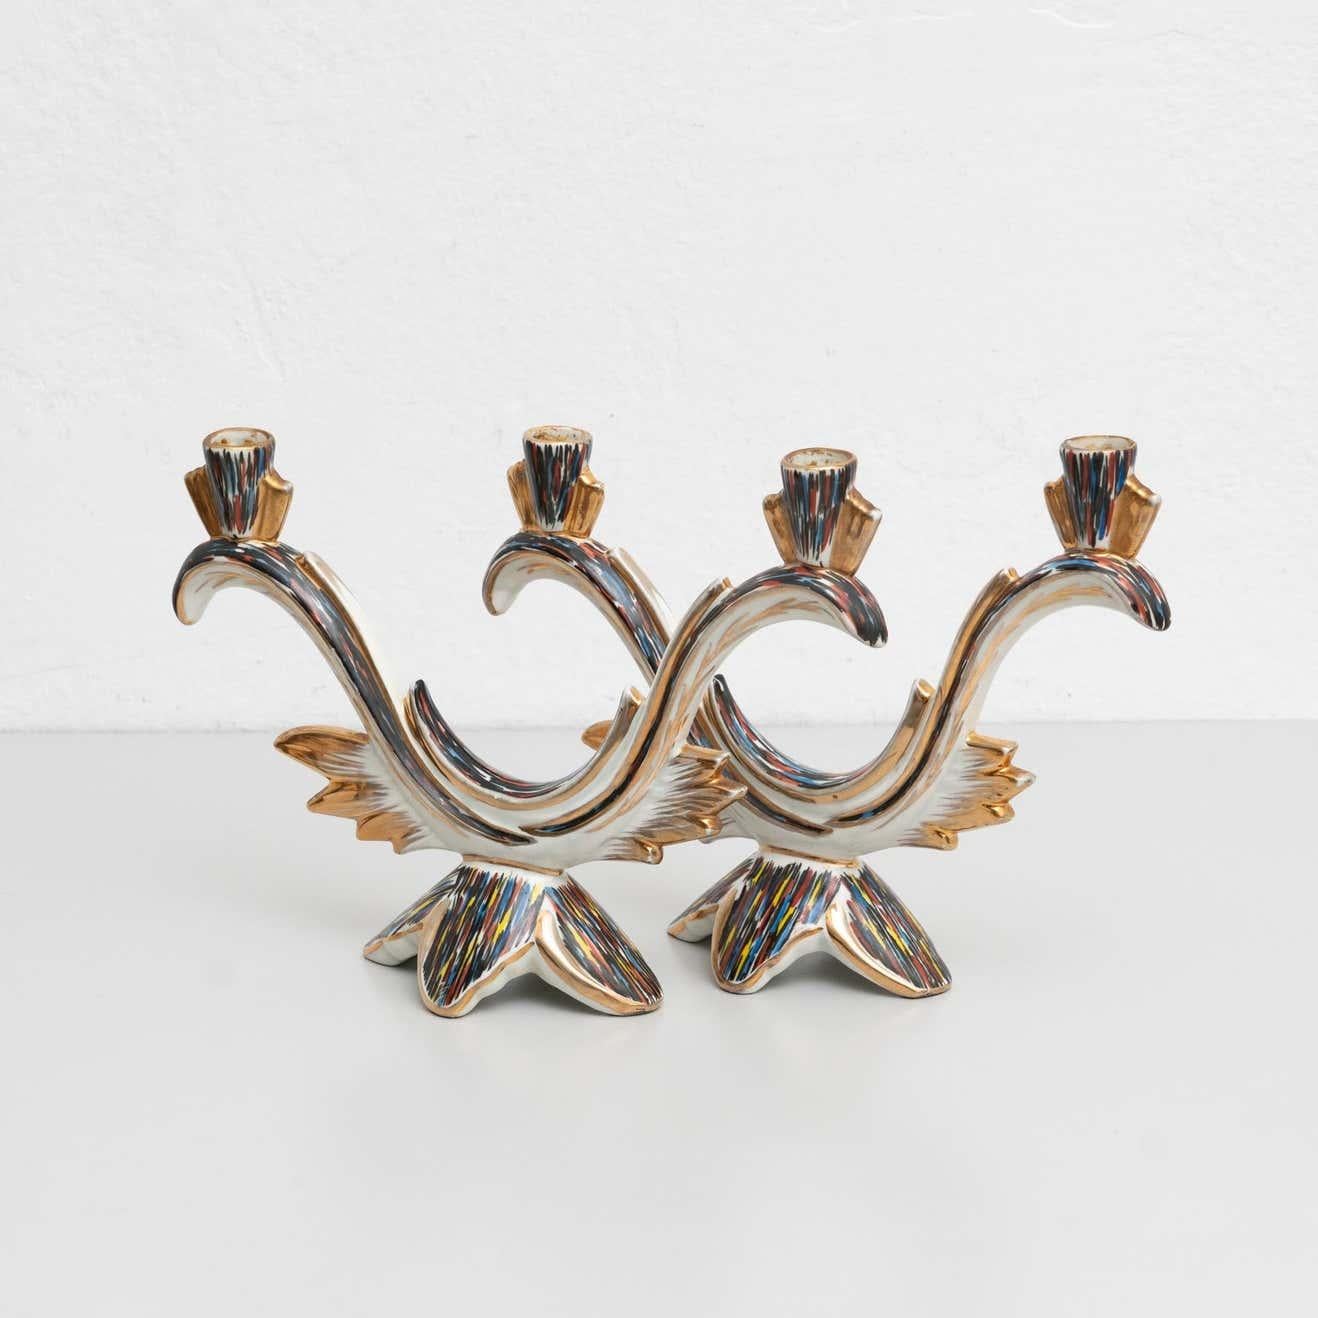 Set of 2 hand painted ceramic candle holders, circa 1940

By unknown manufacturer. Spain.

In original condition, with minor wear consistent with age and use, preserving a beautiful patina.

Materials:
Ceramic.
   